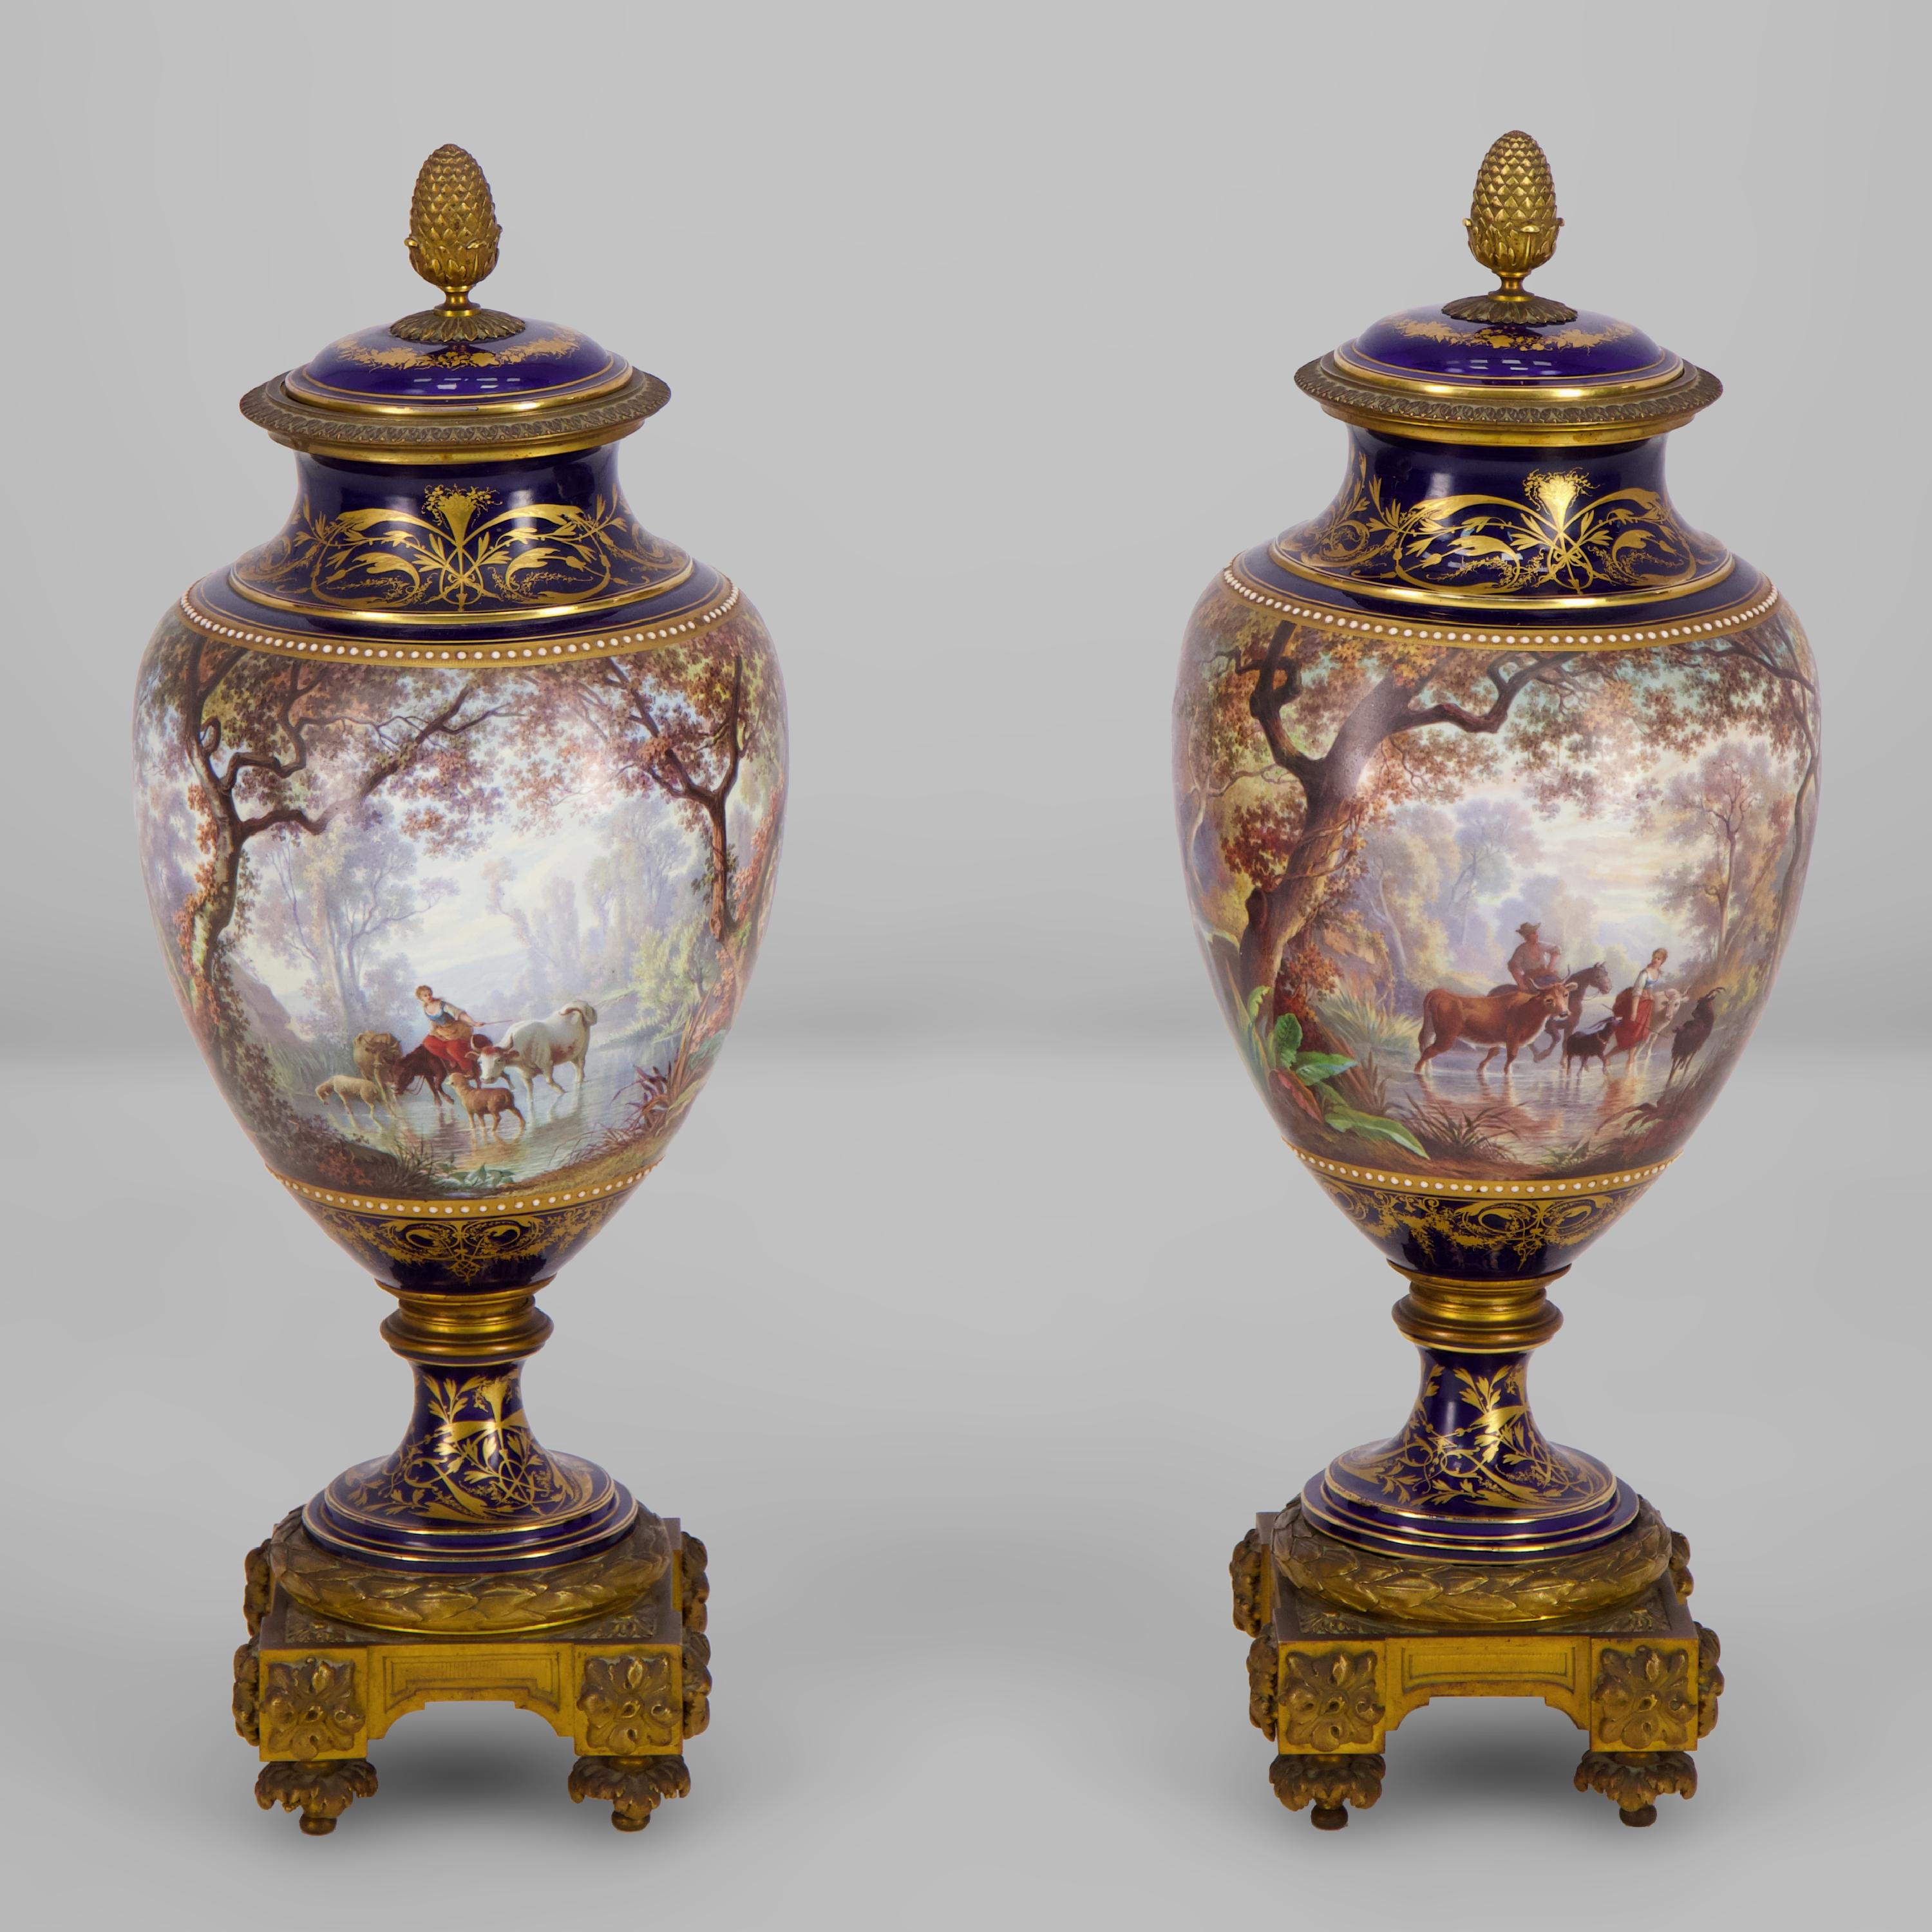 This beautiful pair of covered vases made of porcelain originally comes from the Manufacture of Sèvres where the white pieces were bought in 1869, decorated then mounted in gilt bronze by J. Machereau.

He is designated as “ porcelain painter and